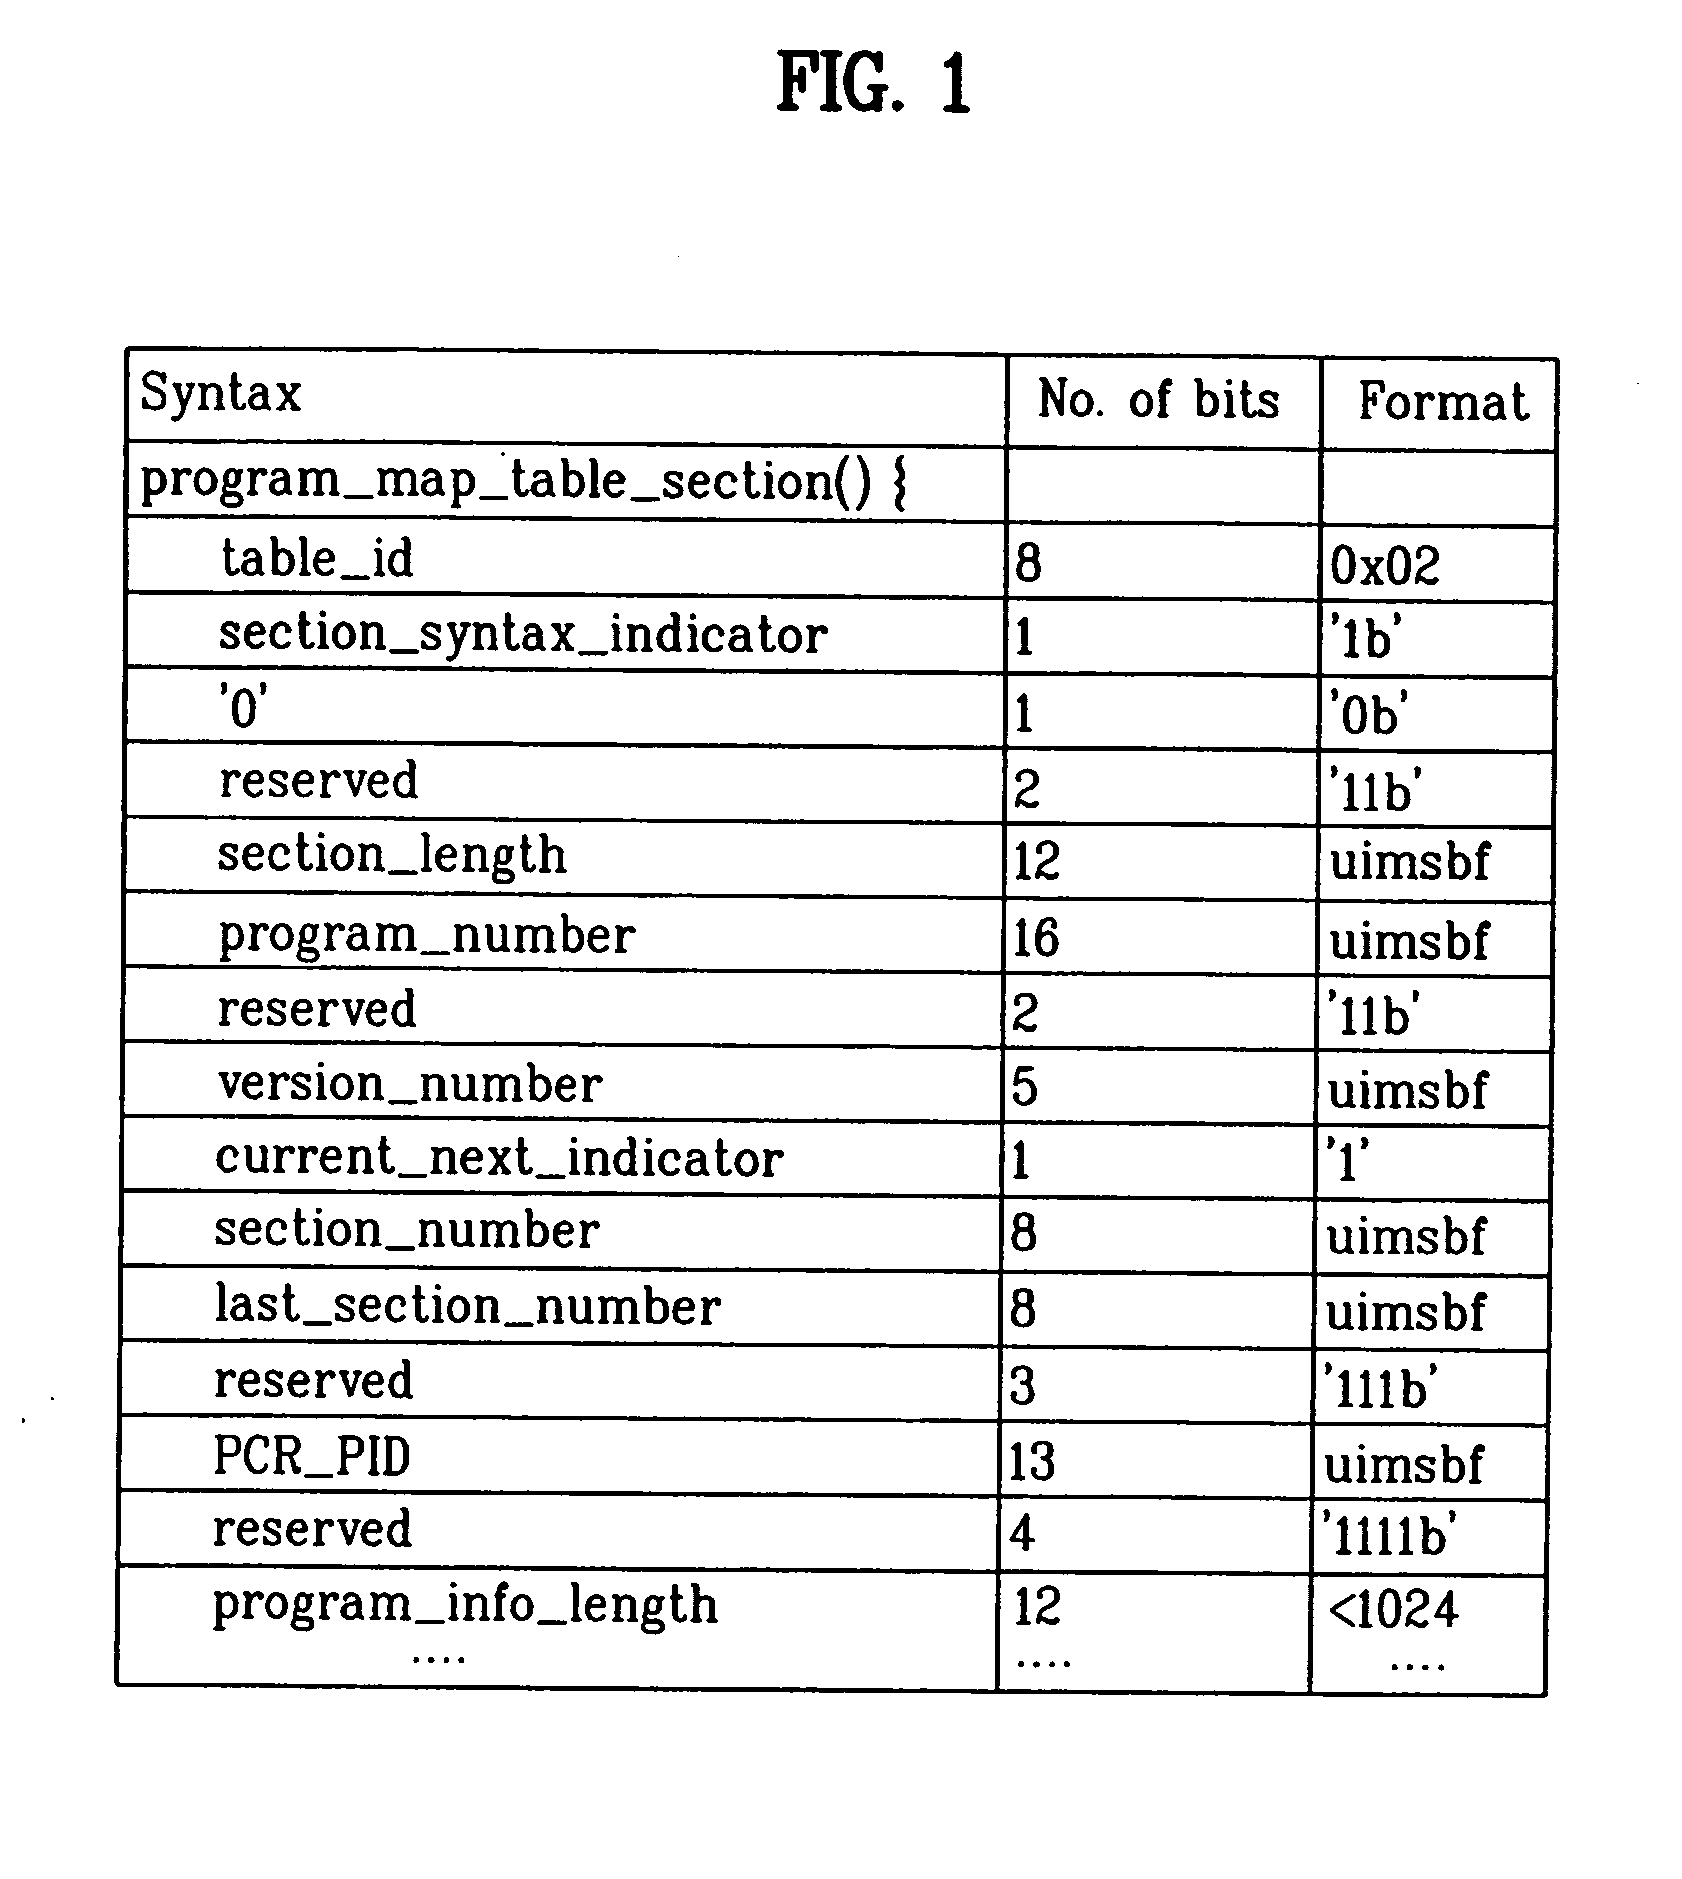 Digital television signal, method of processing a digital television signal in a transmitter and a receiver, and receiver